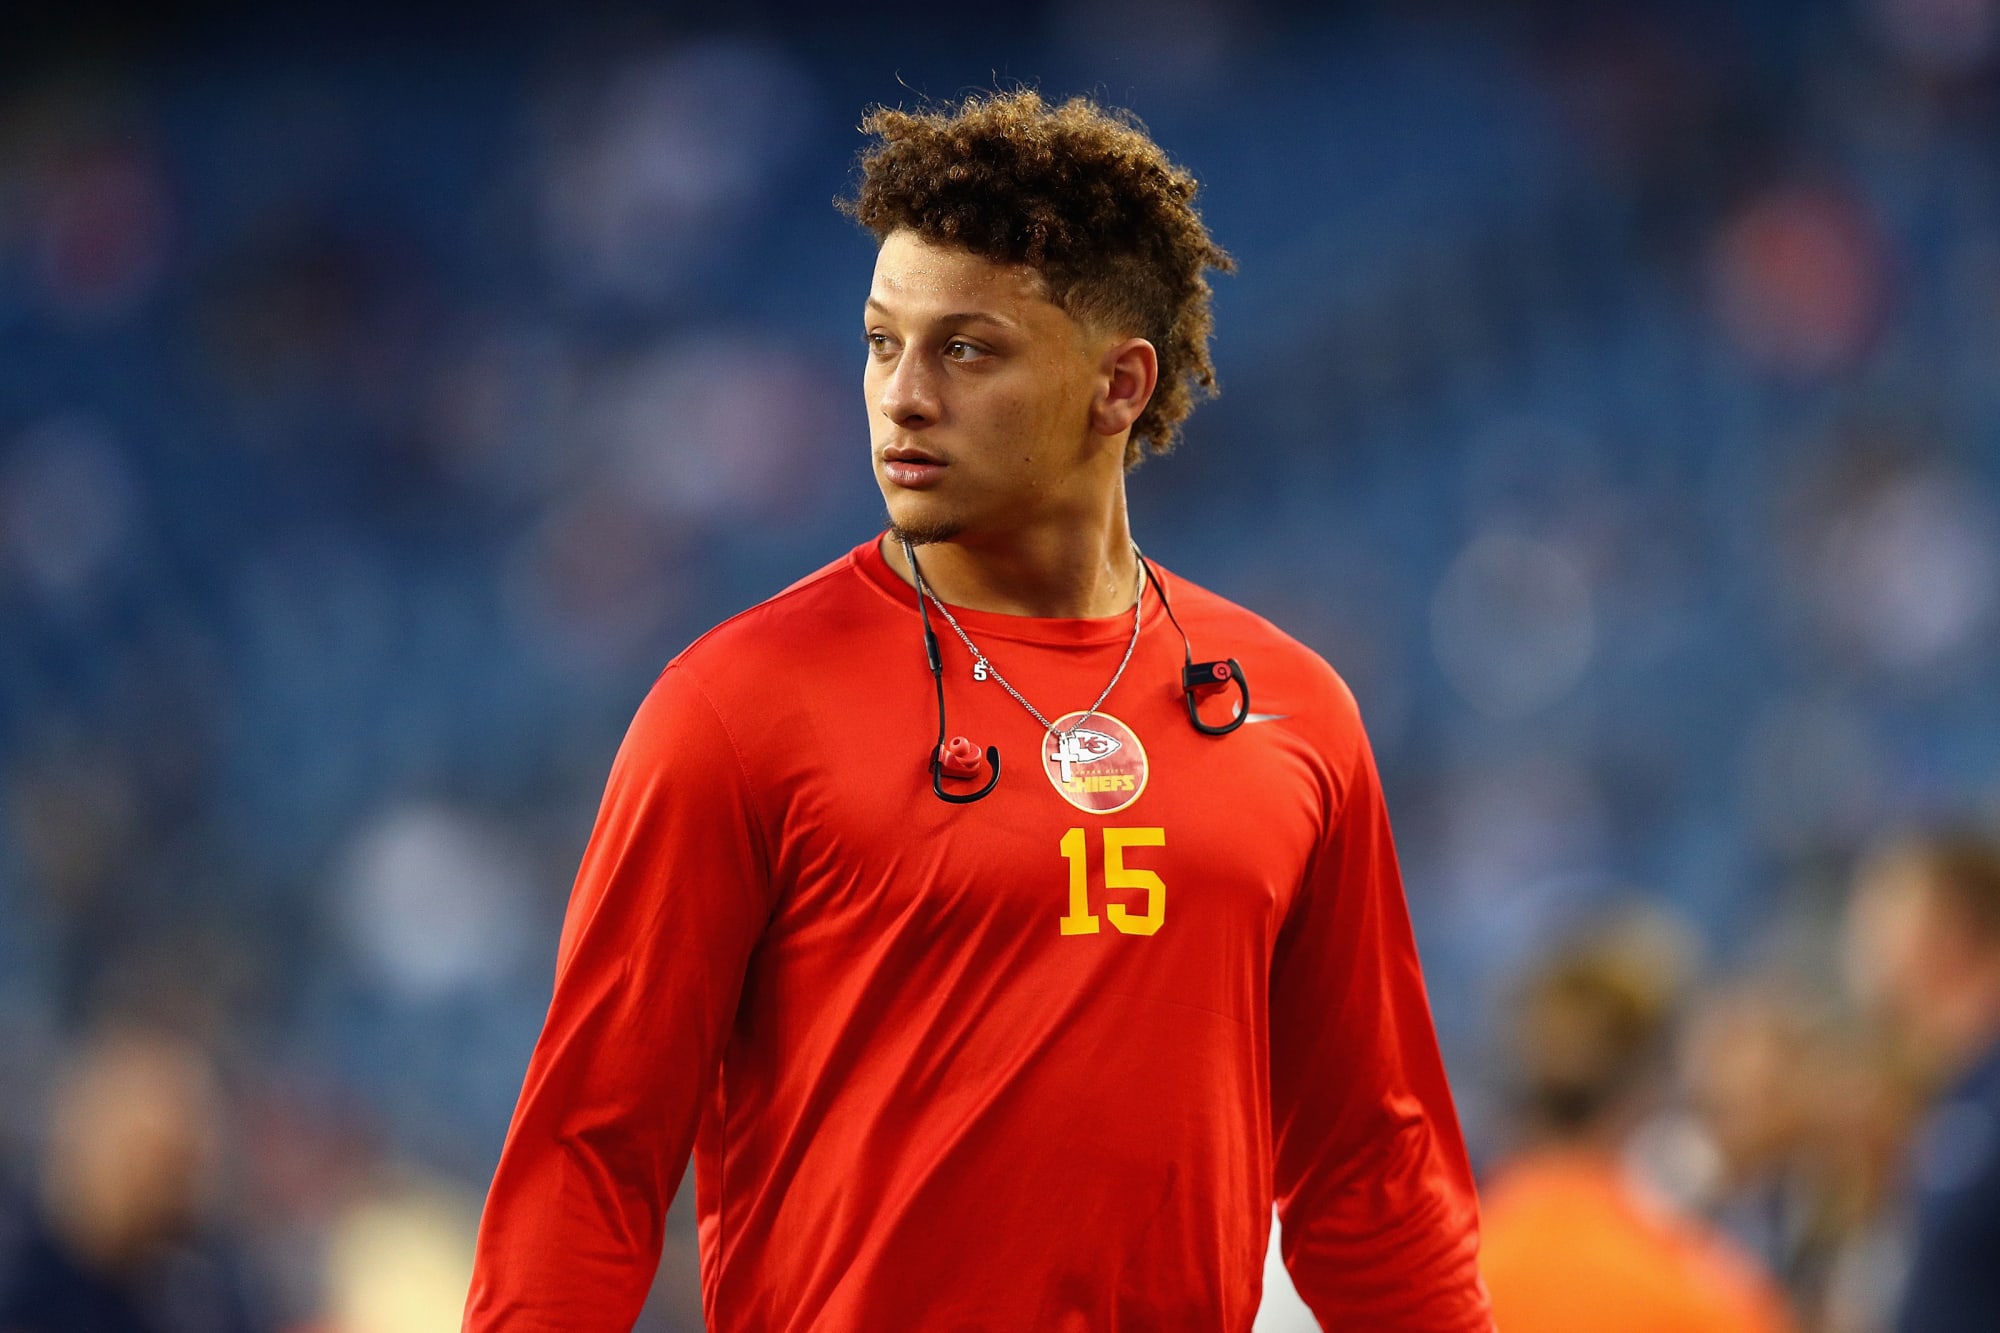 Photo of Patrick Mahomes 40 time: How did he compare to other QBs?